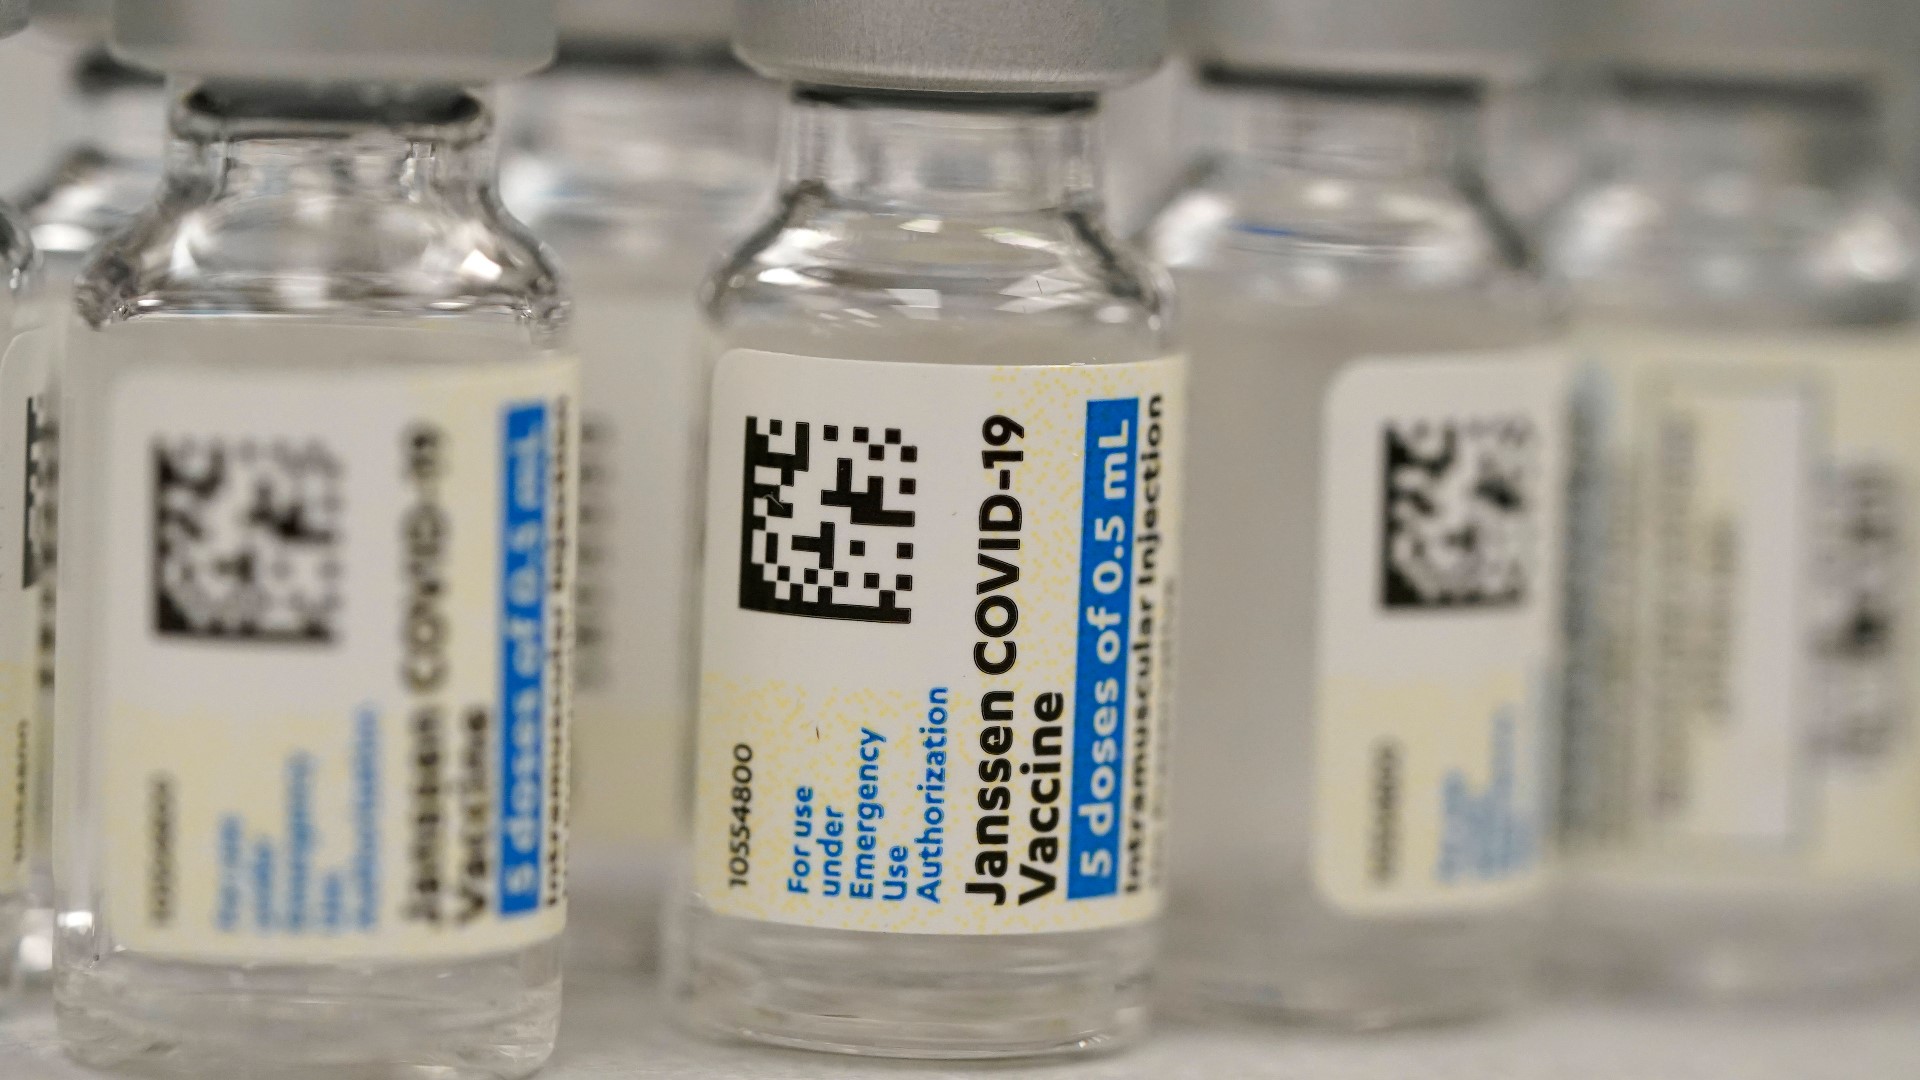 Beginning next week, college campuses in Ohio will begin offering vaccinations to students before they break for the summer by May 1, DeWine said.